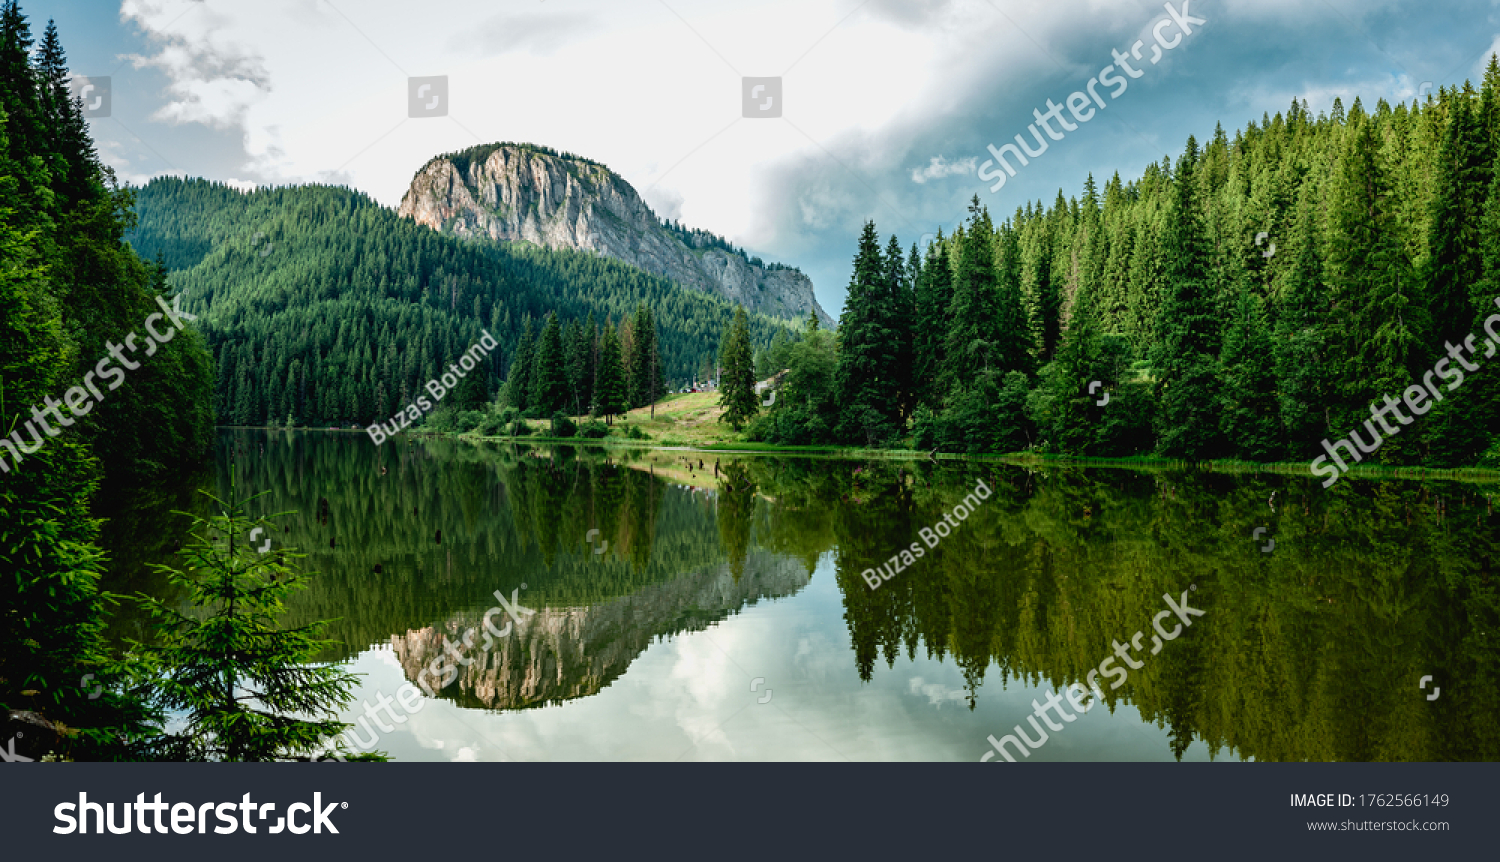 Summer scenery of mountain lake Lacul Rosu (Red Lake or Killer Lake). Popular travel destination and place for active rest and adventures in Eastern Carpathians. Harghita County, Romania #1762566149